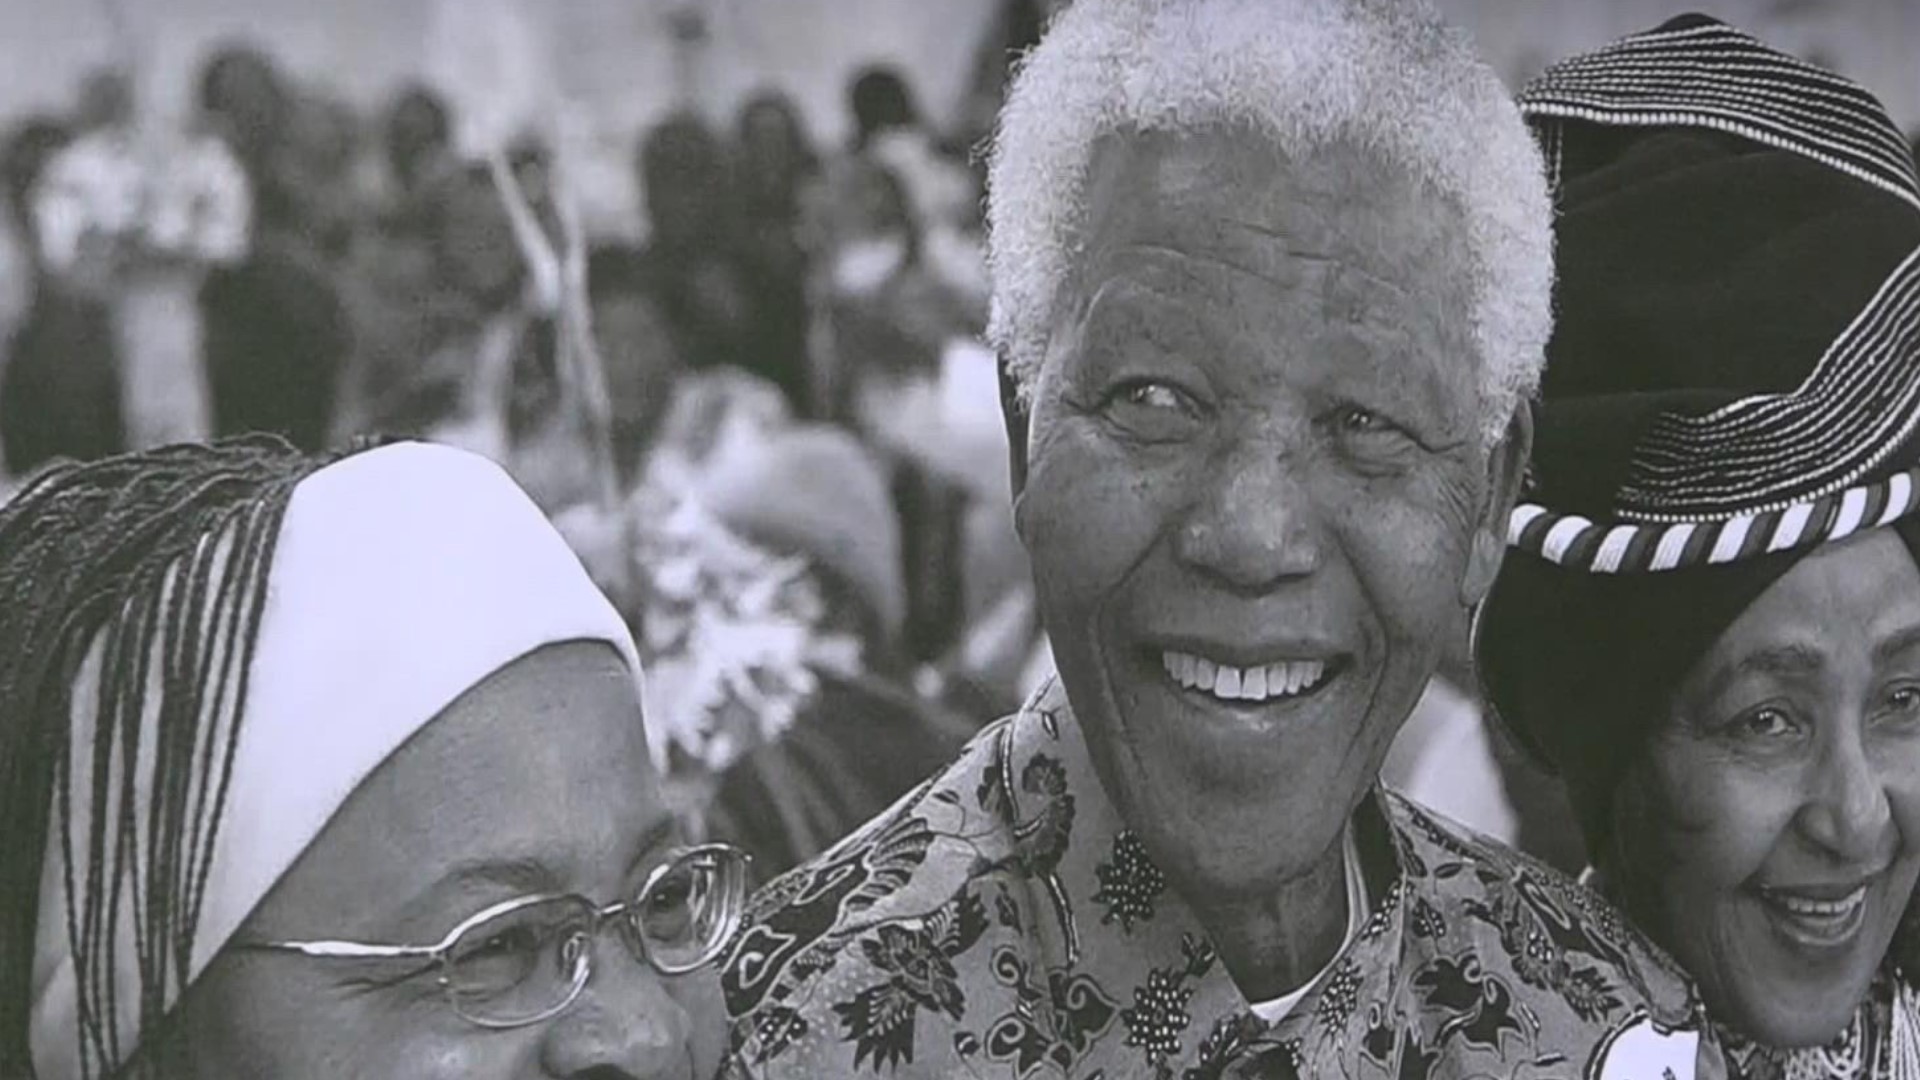 Visitors are taken on a journey through Nelson Mandela's life through a world-class exhibit